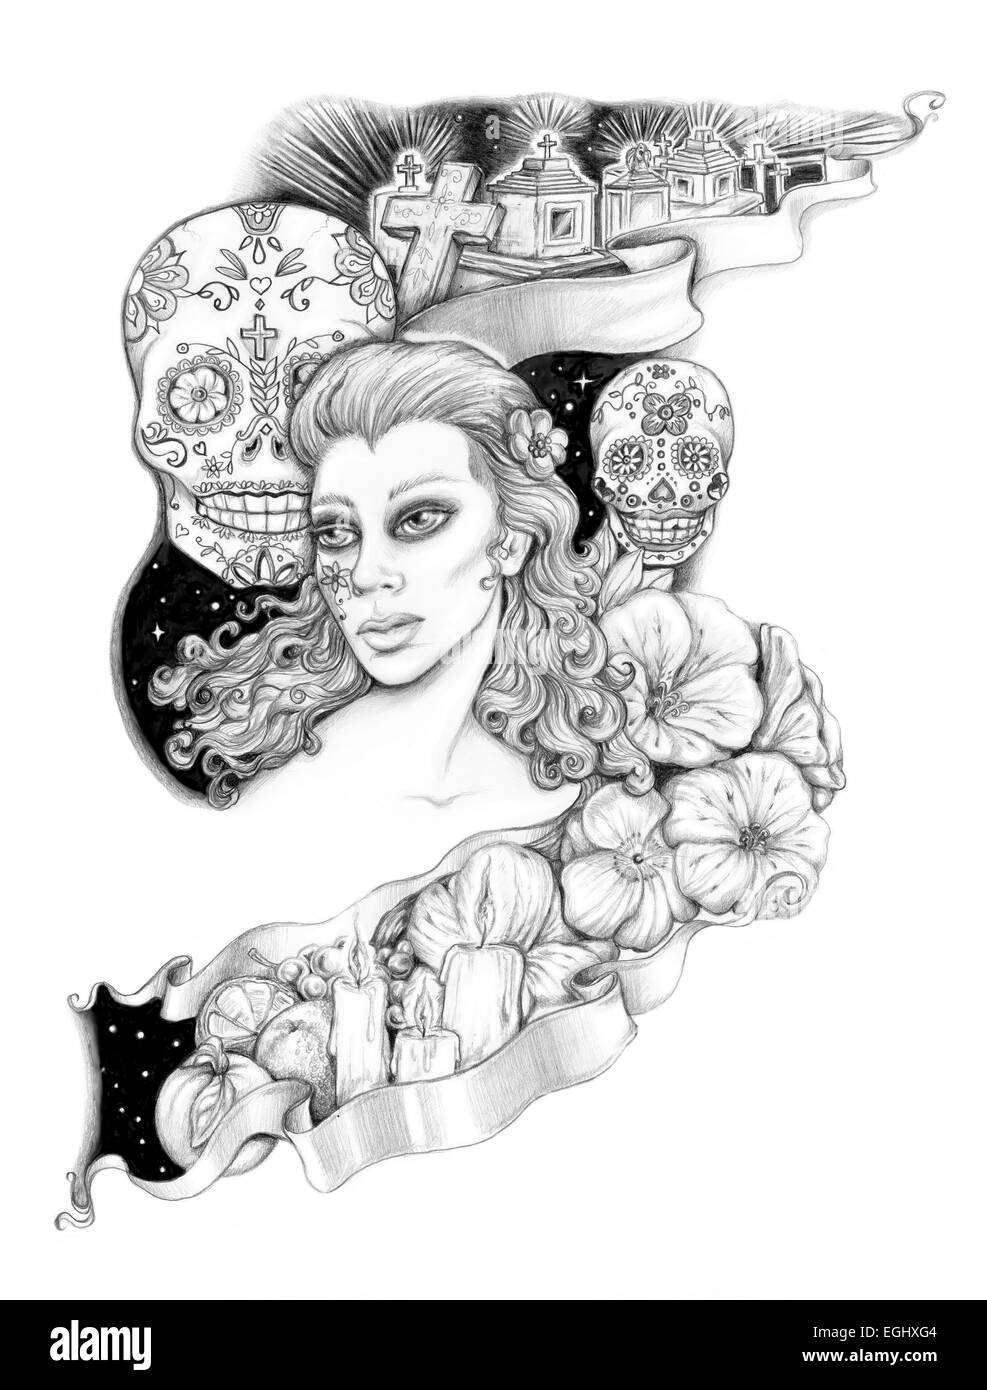 The Mexican Day of The dead - Dia De Los Meurtos.  black and white pencil illustration. Stock Photo